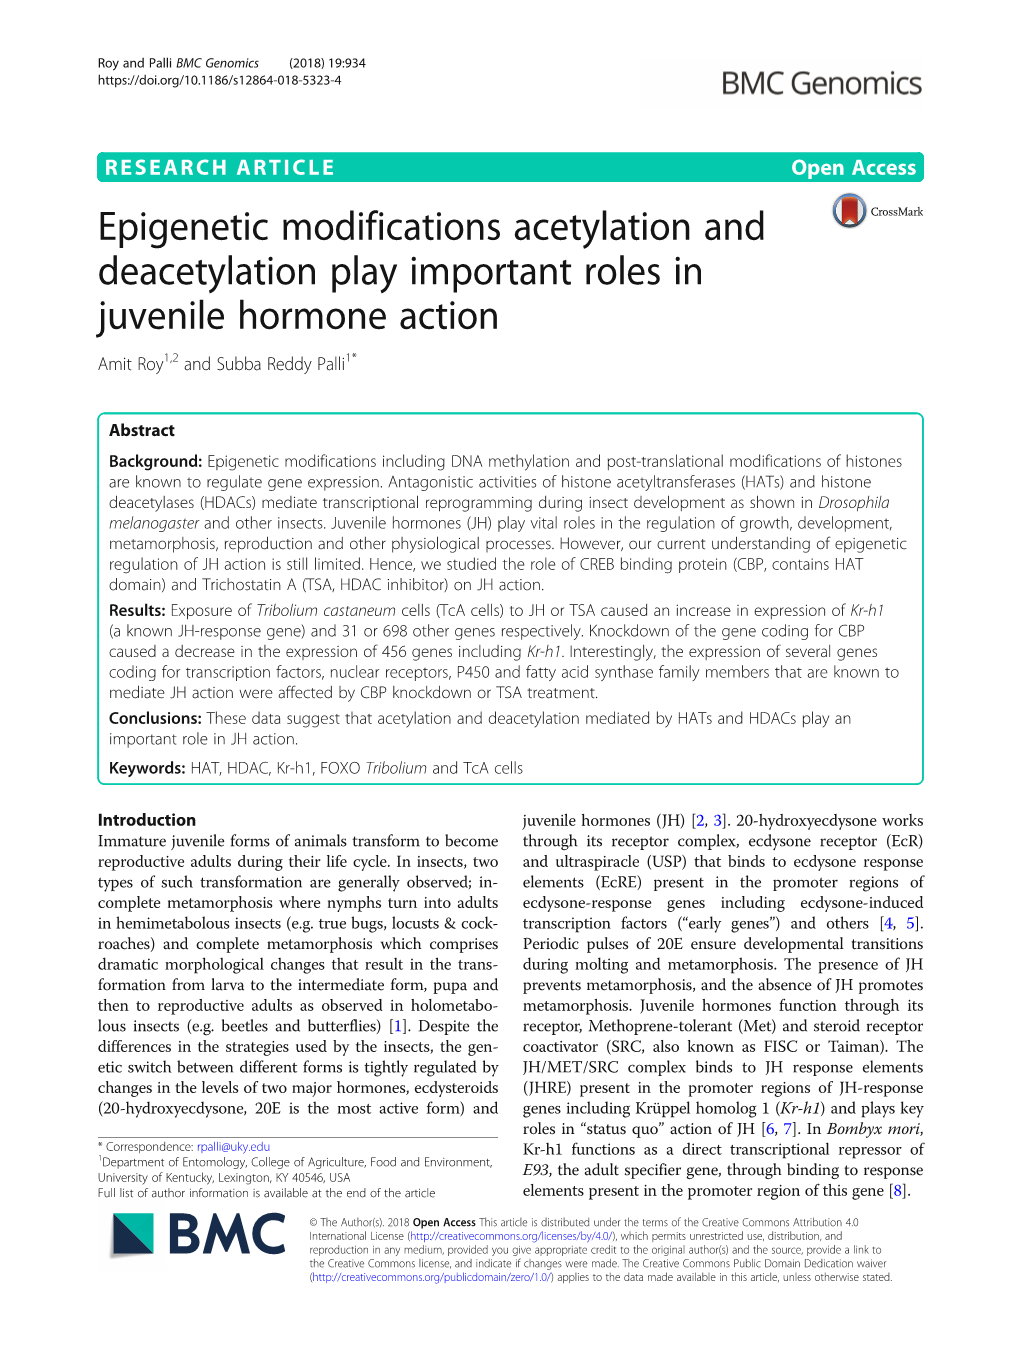 Epigenetic Modifications Acetylation and Deacetylation Play Important Roles in Juvenile Hormone Action Amit Roy1,2 and Subba Reddy Palli1*